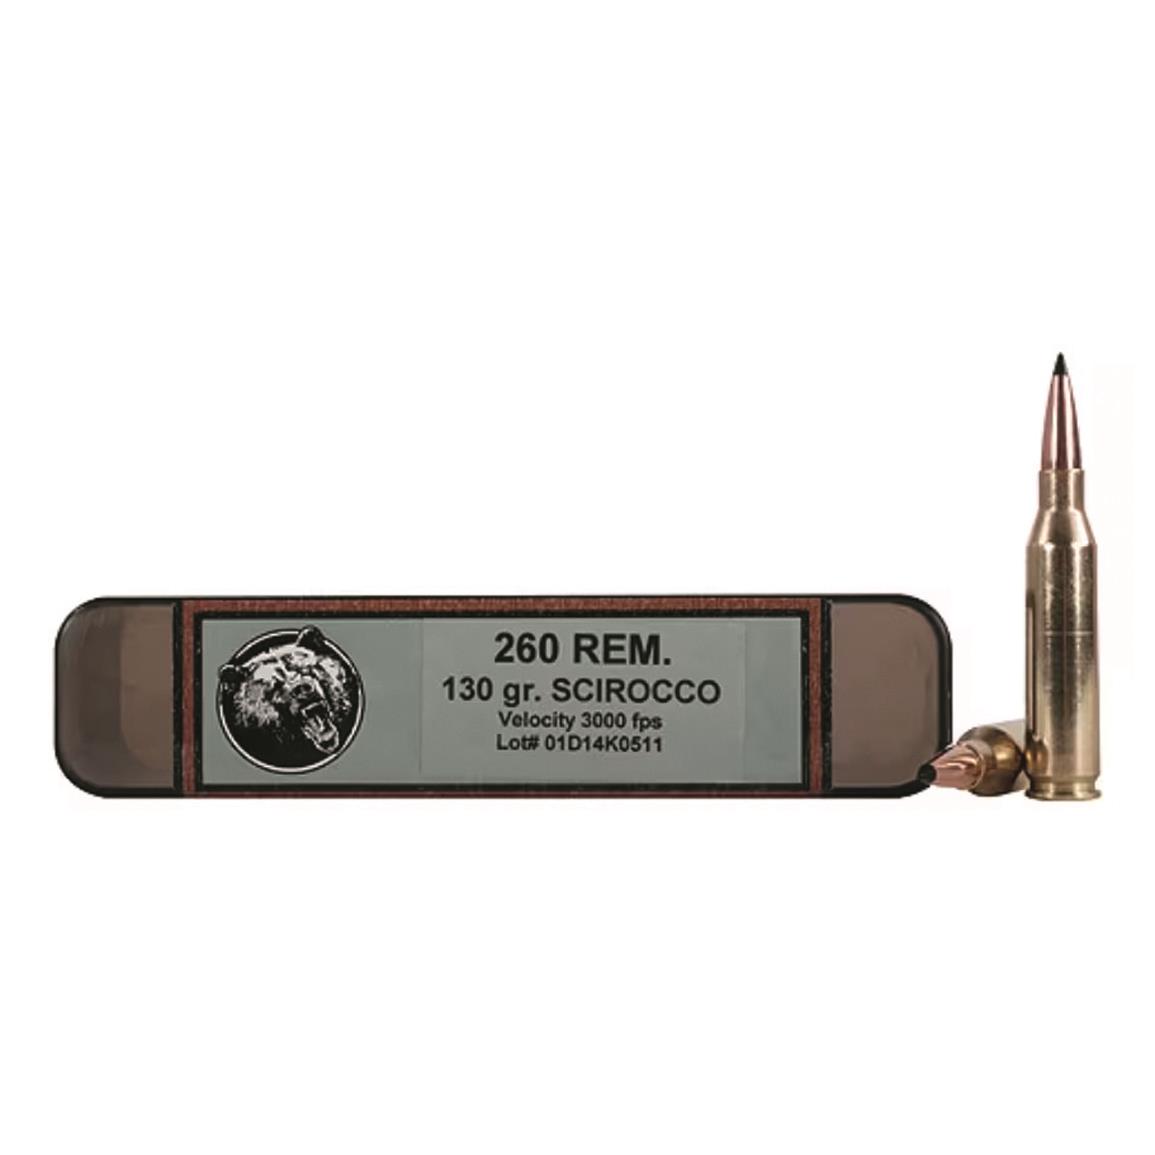 Grizzly Cartridge Co., .260 Rem., Swift Scirocco Polymer-Tip BT, 130 Grain, 20 Rounds